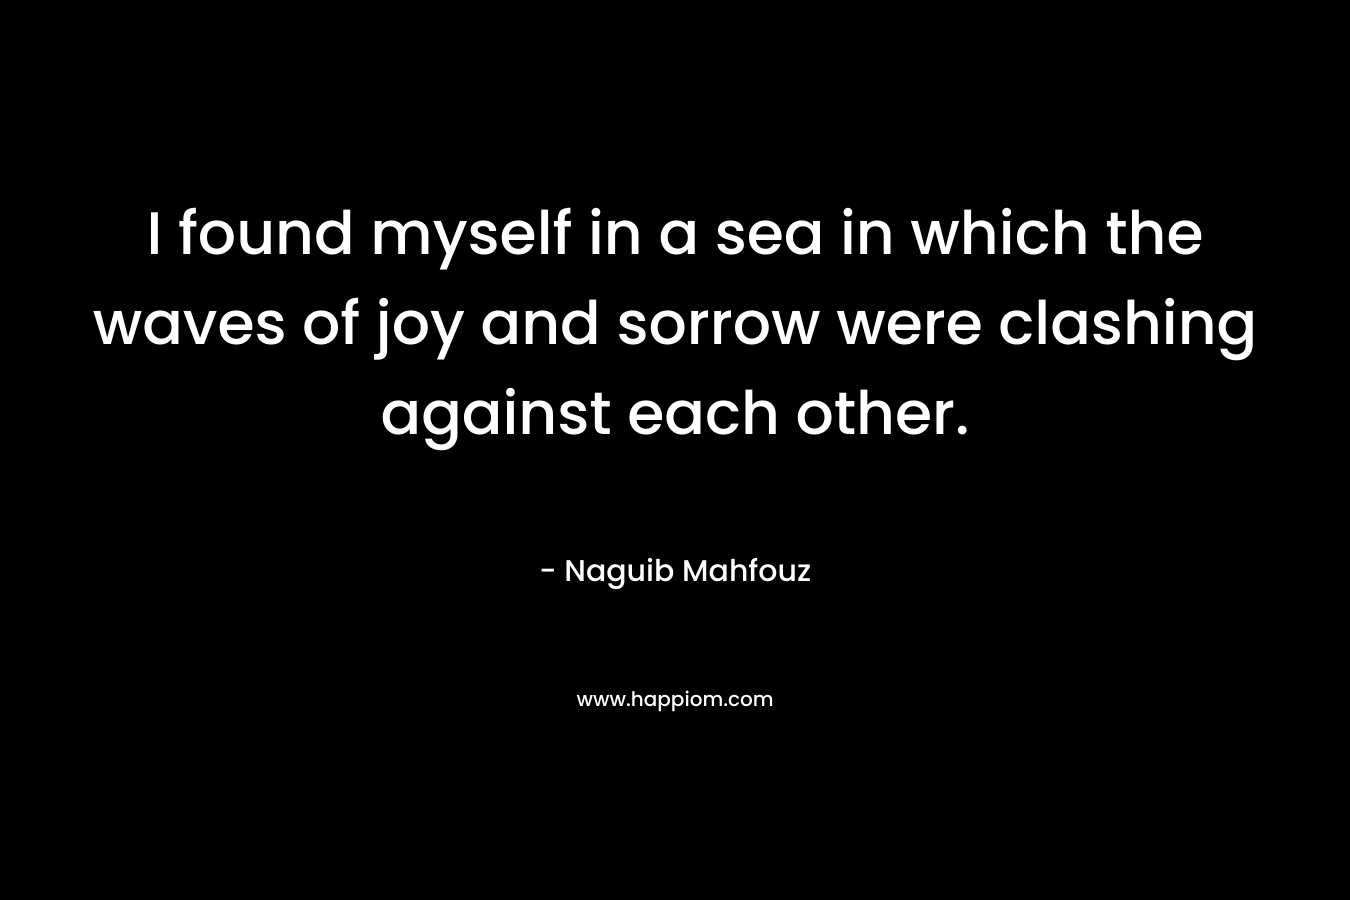 I found myself in a sea in which the waves of joy and sorrow were clashing against each other. – Naguib Mahfouz